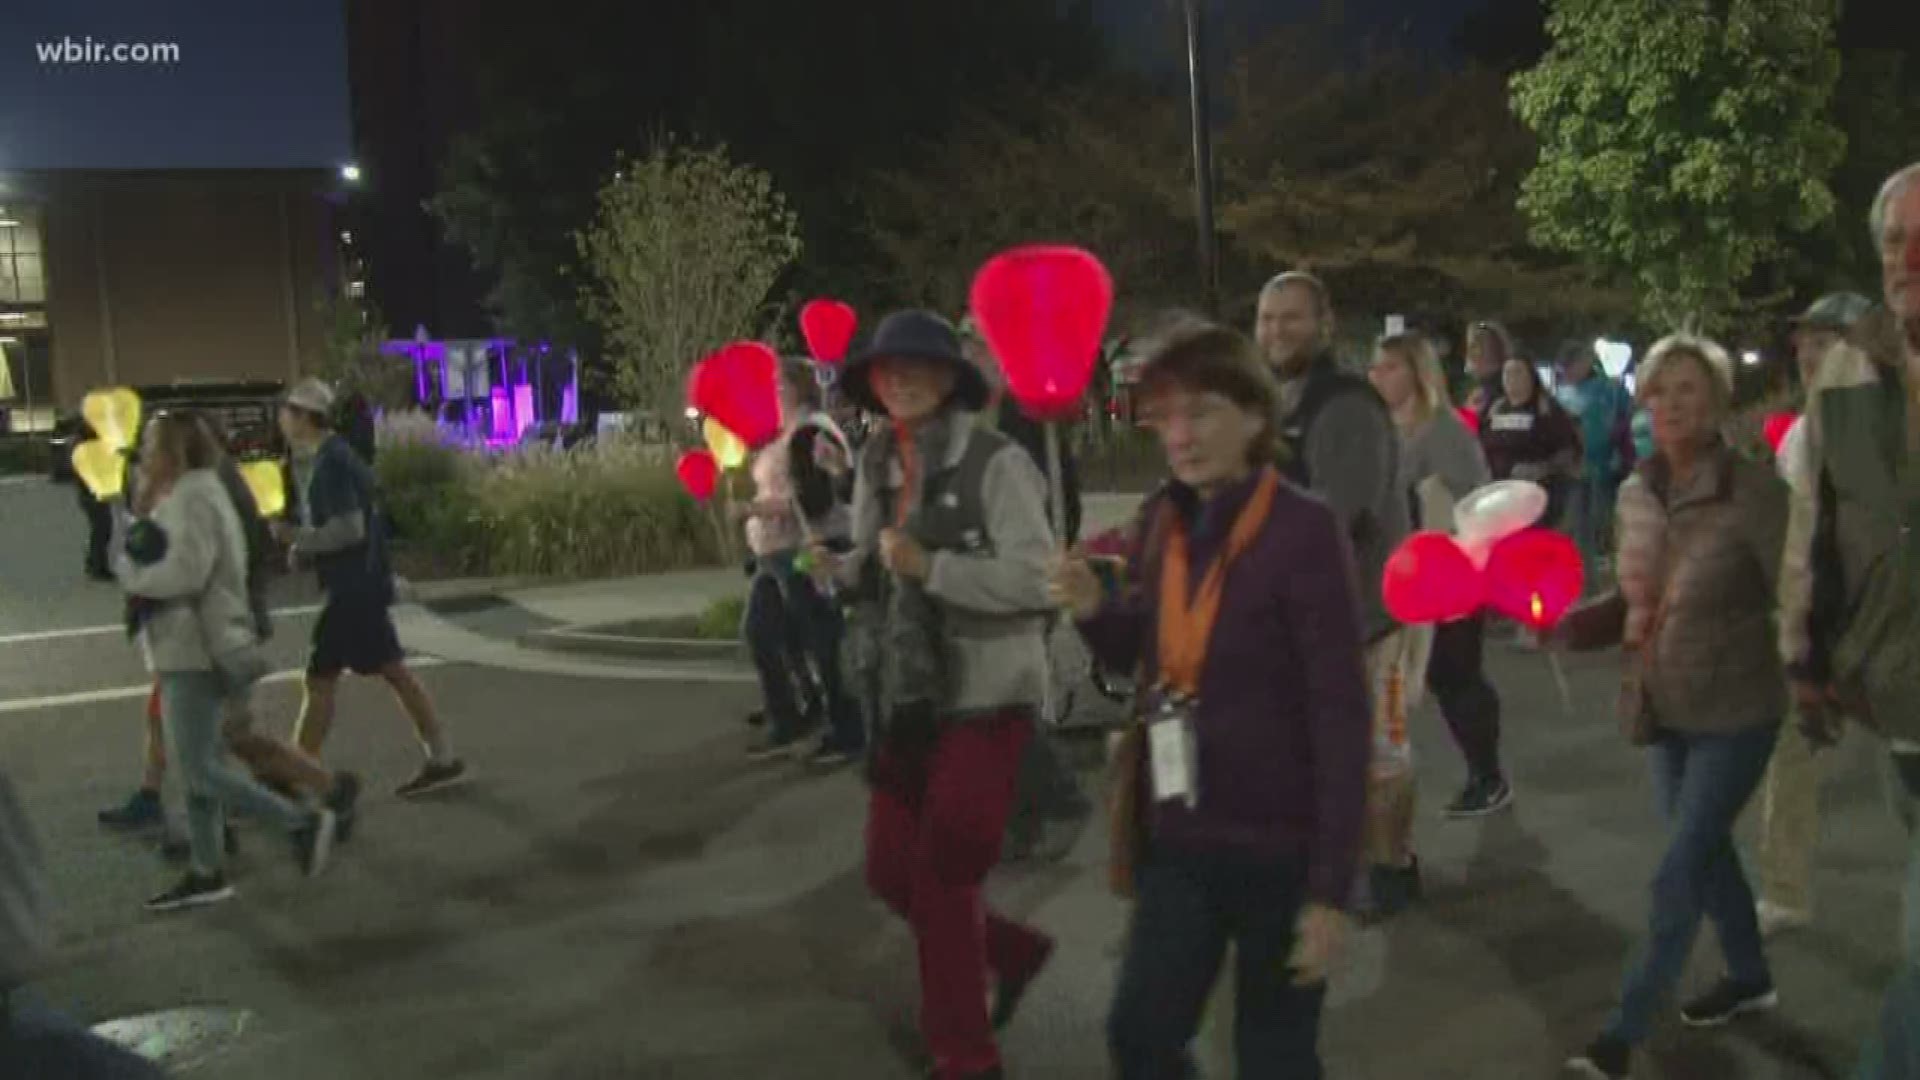 The event allows people to celebrate and remember people touched by cancer.